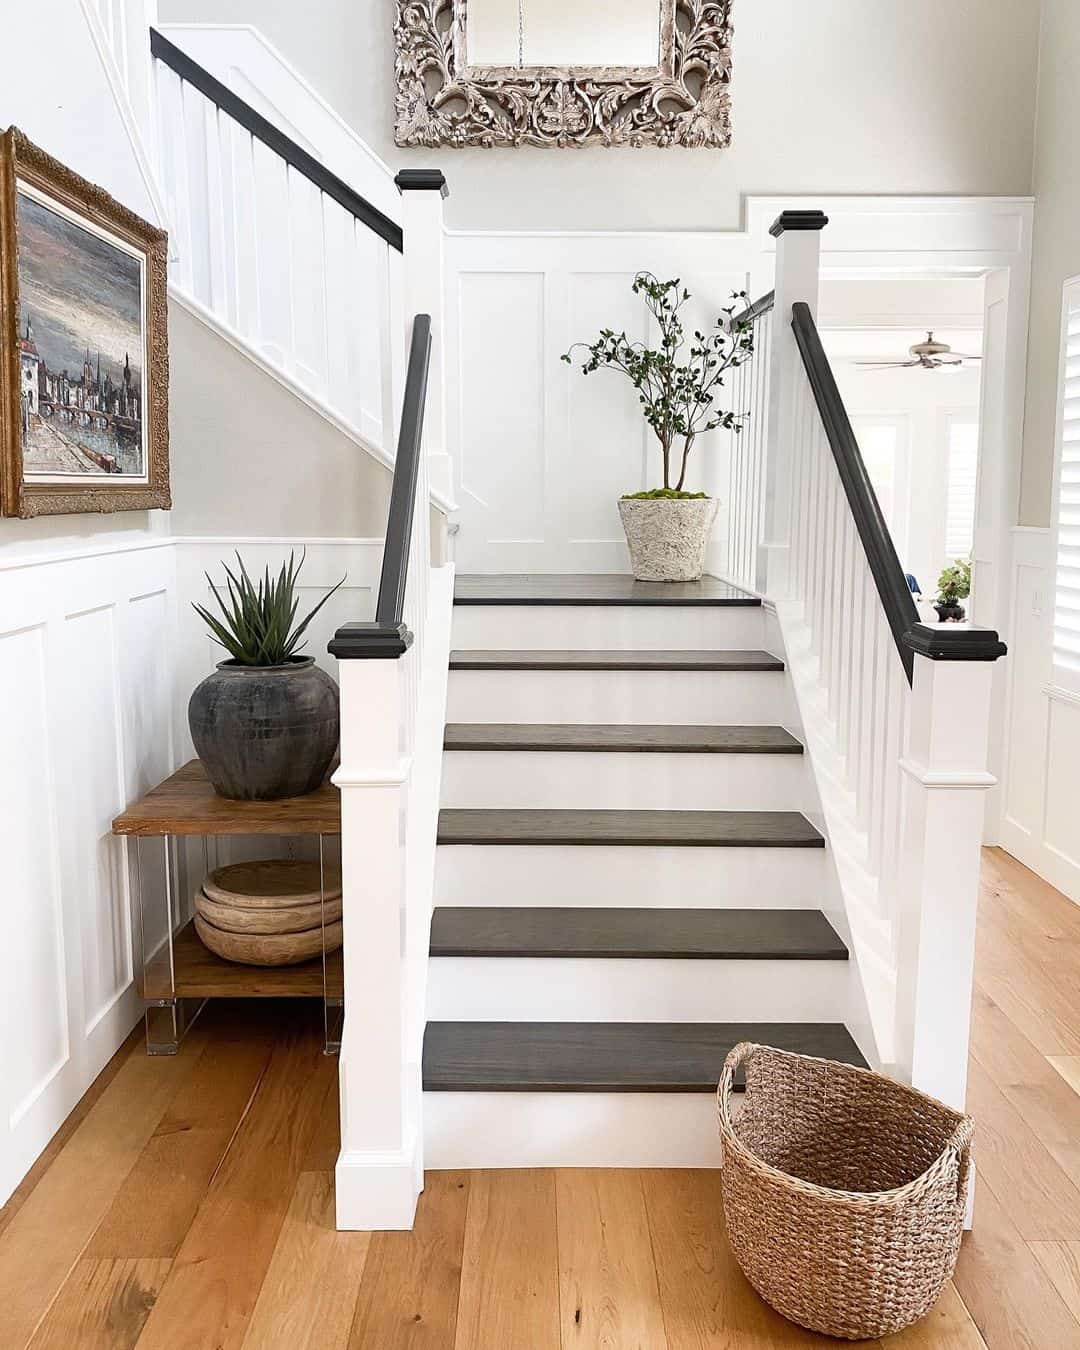 How To Decorate A Stairwell Landing